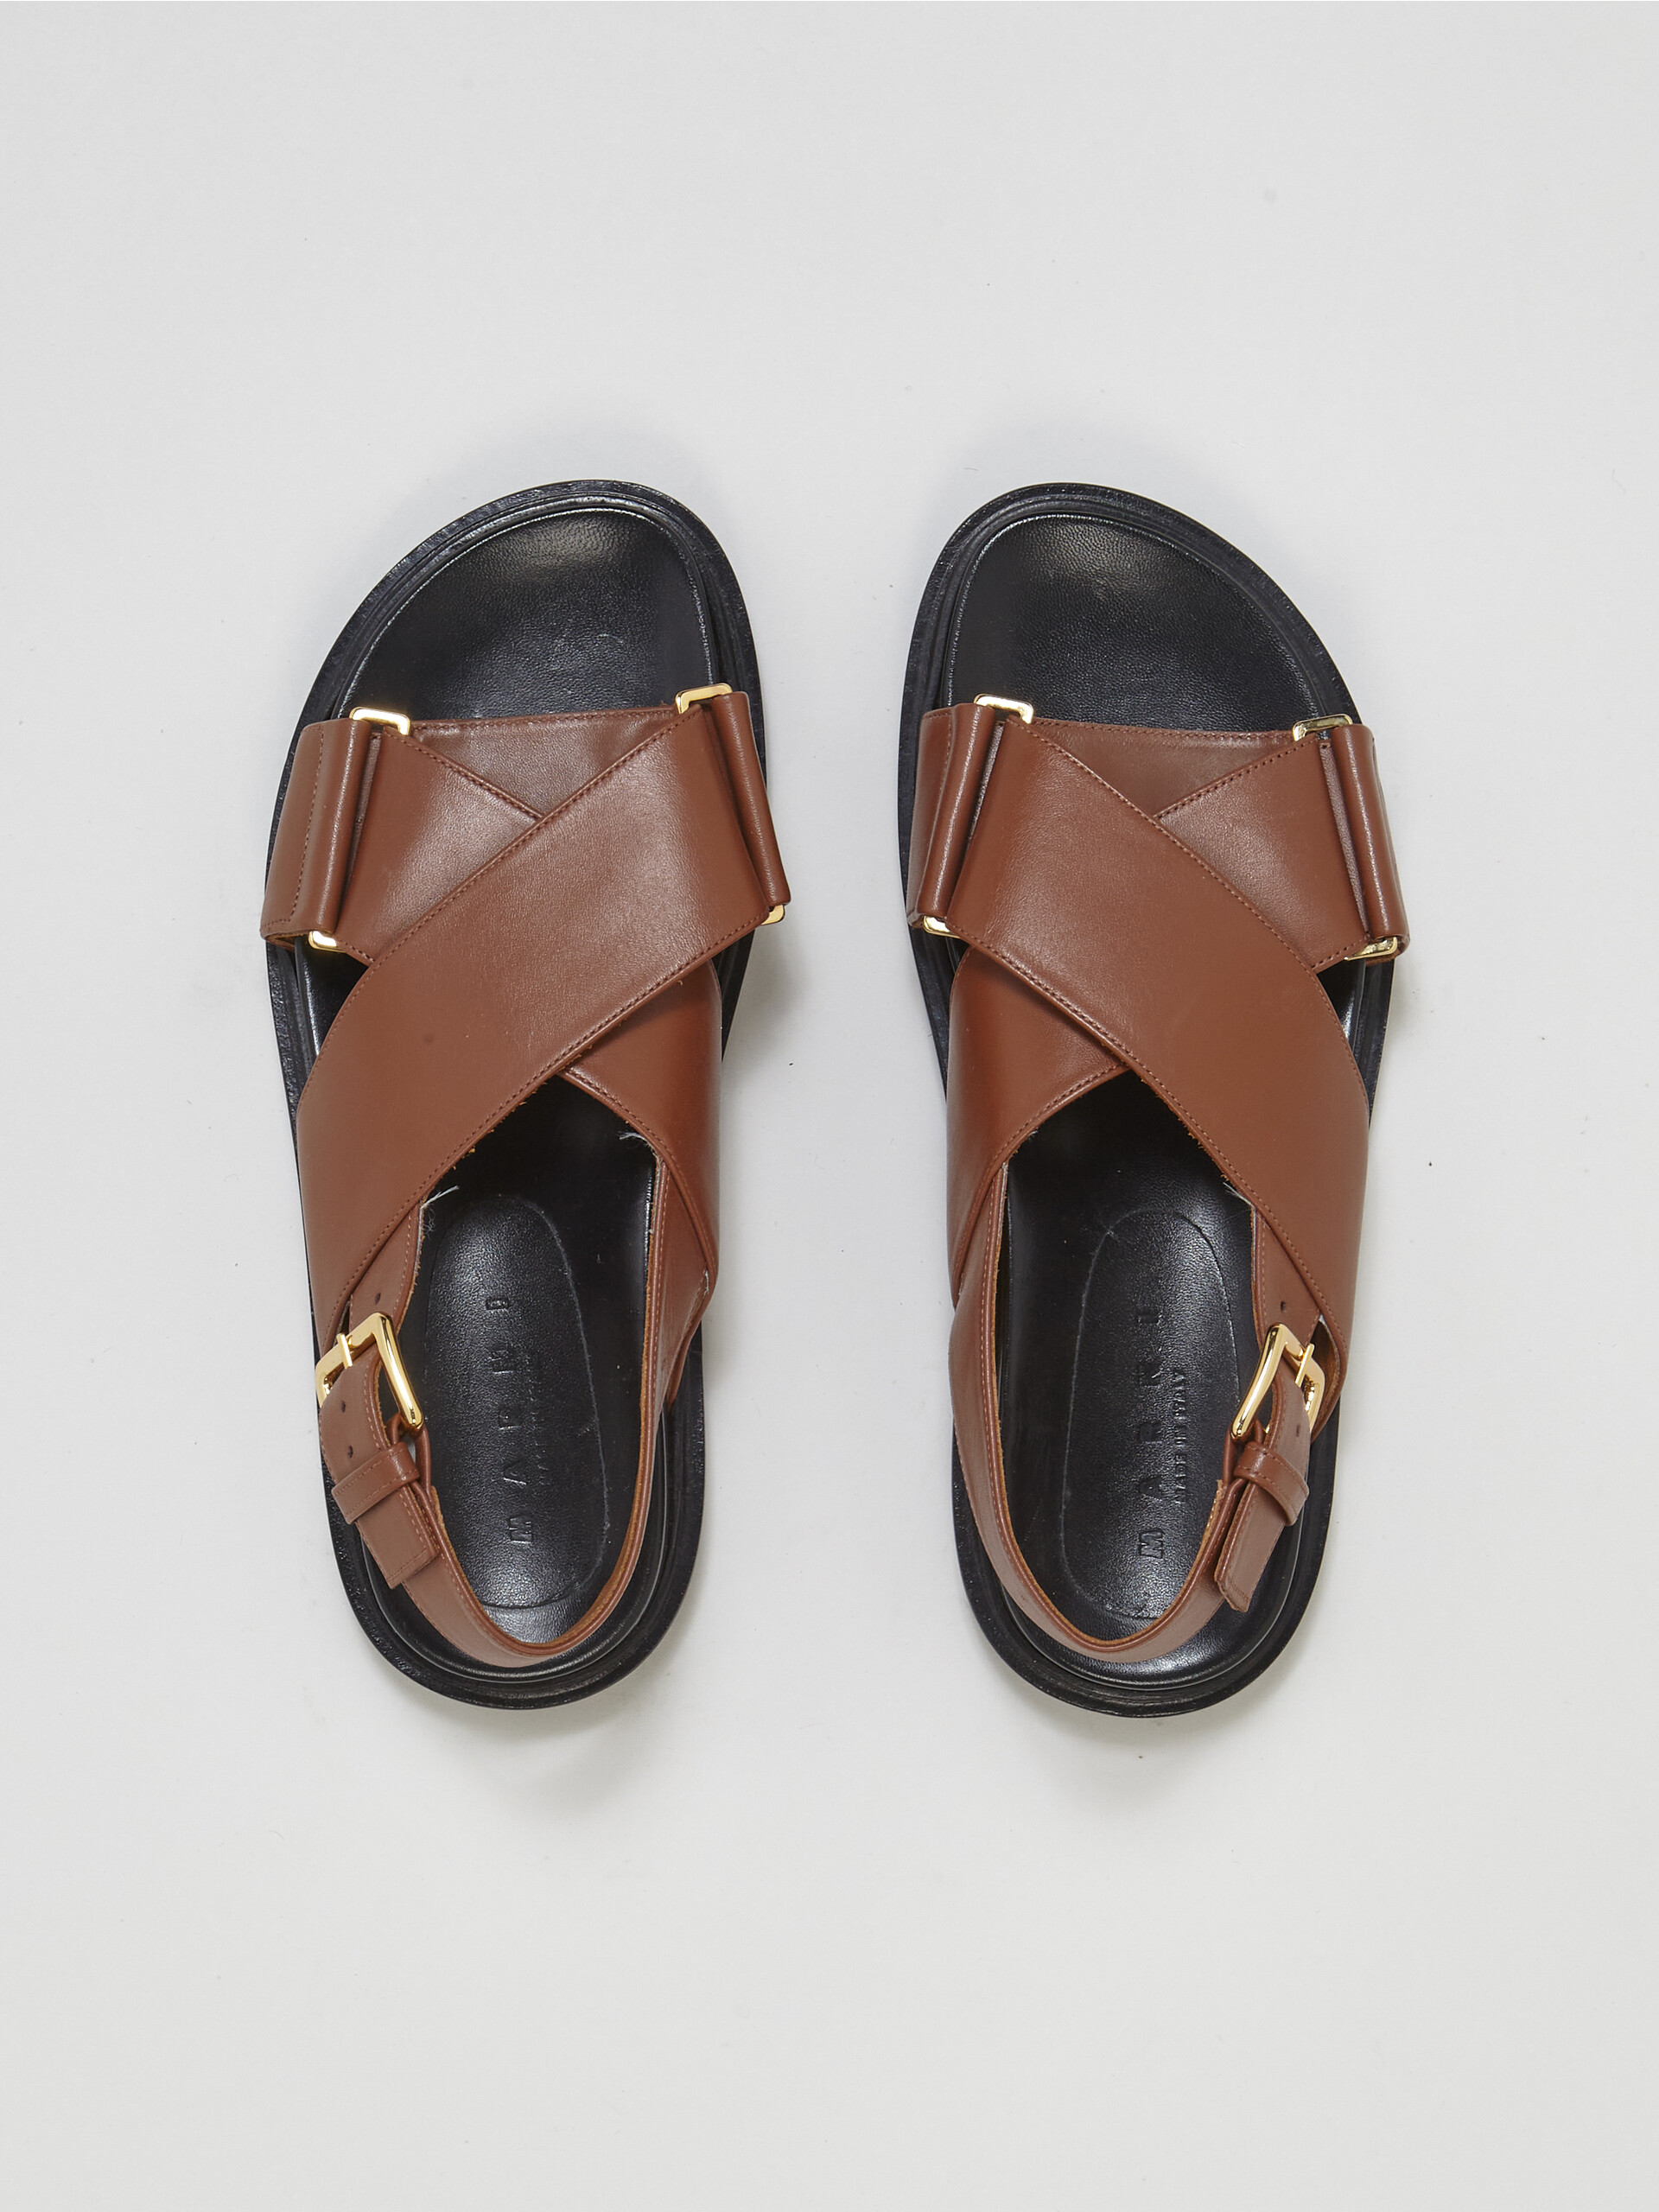 Brown smooth calf leather fussbett - Sandals - Image 4